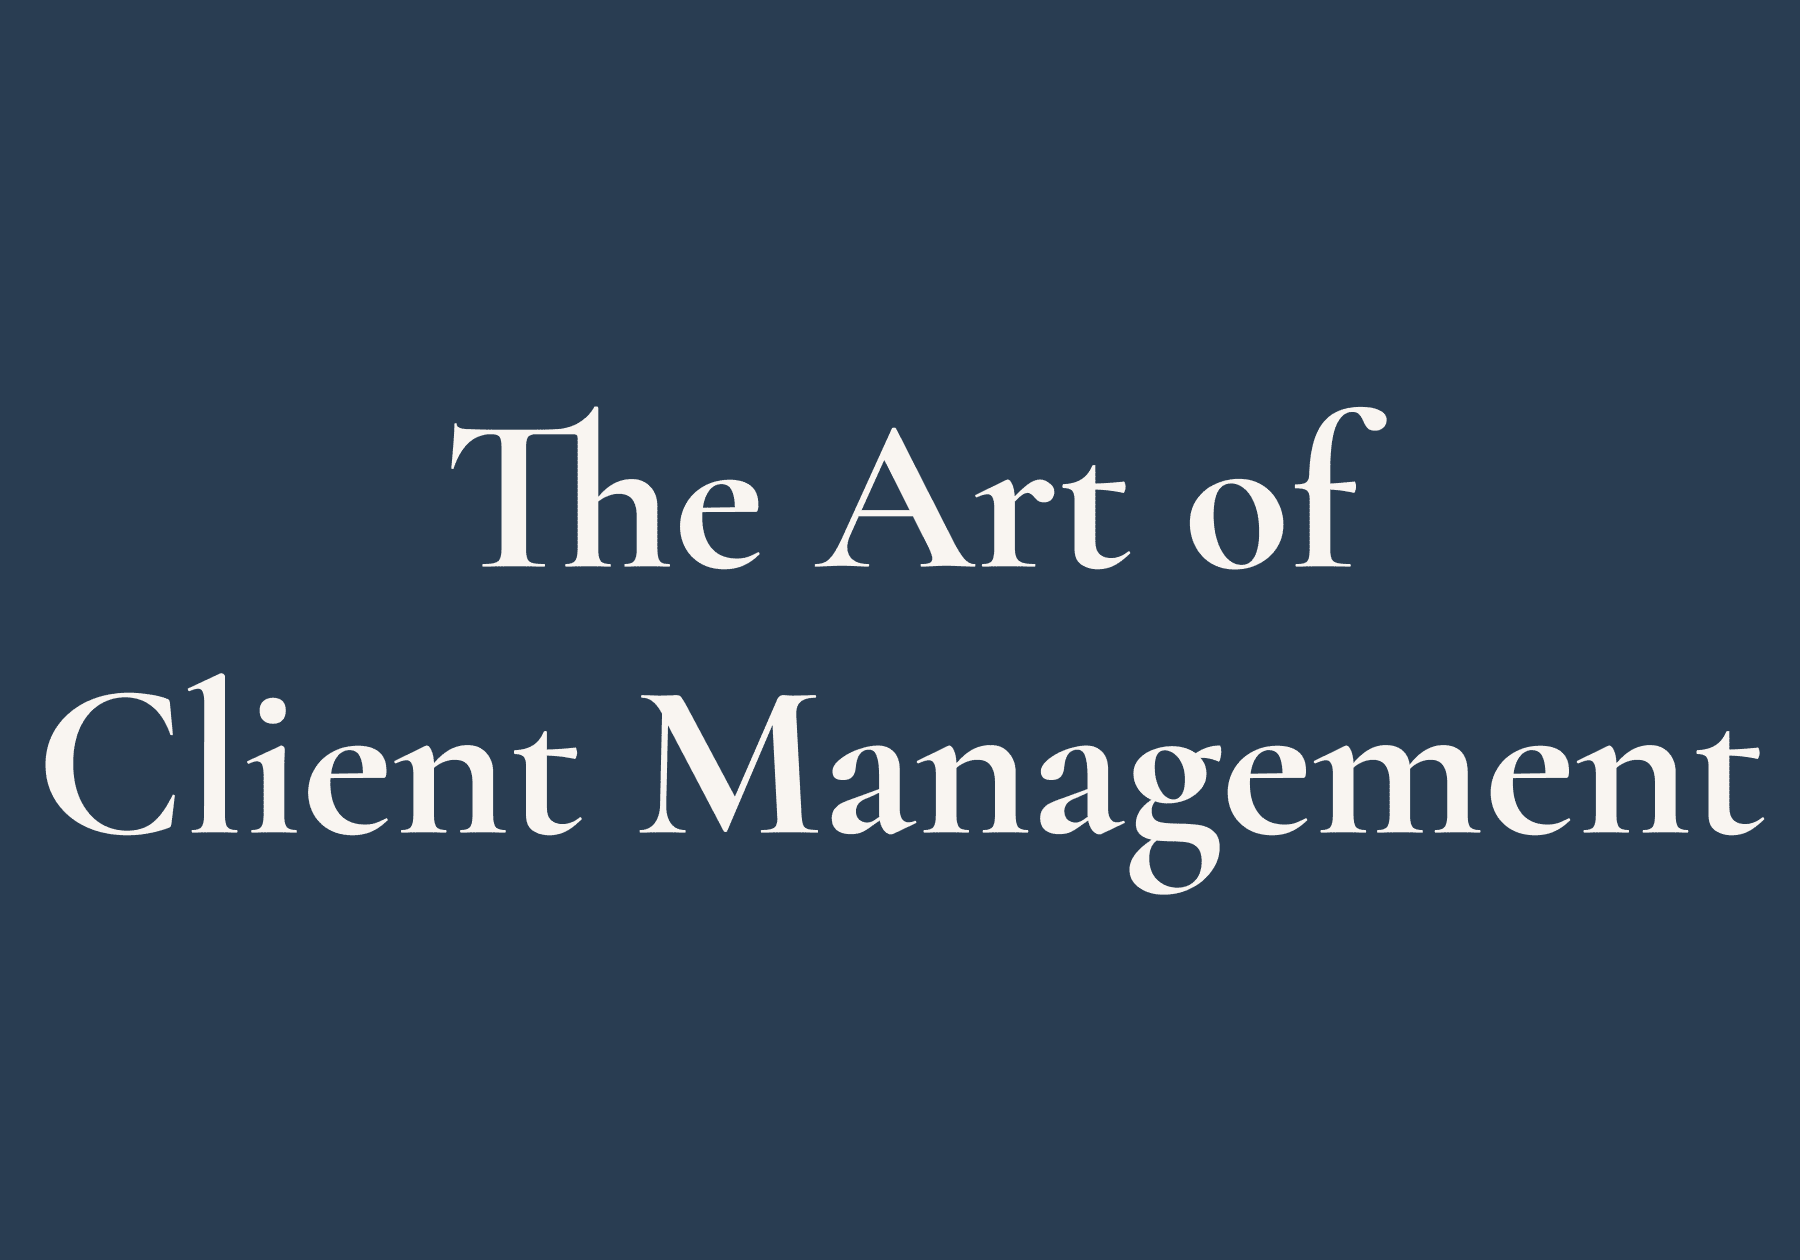 Tom Critchlow - The Art of effective Client Management